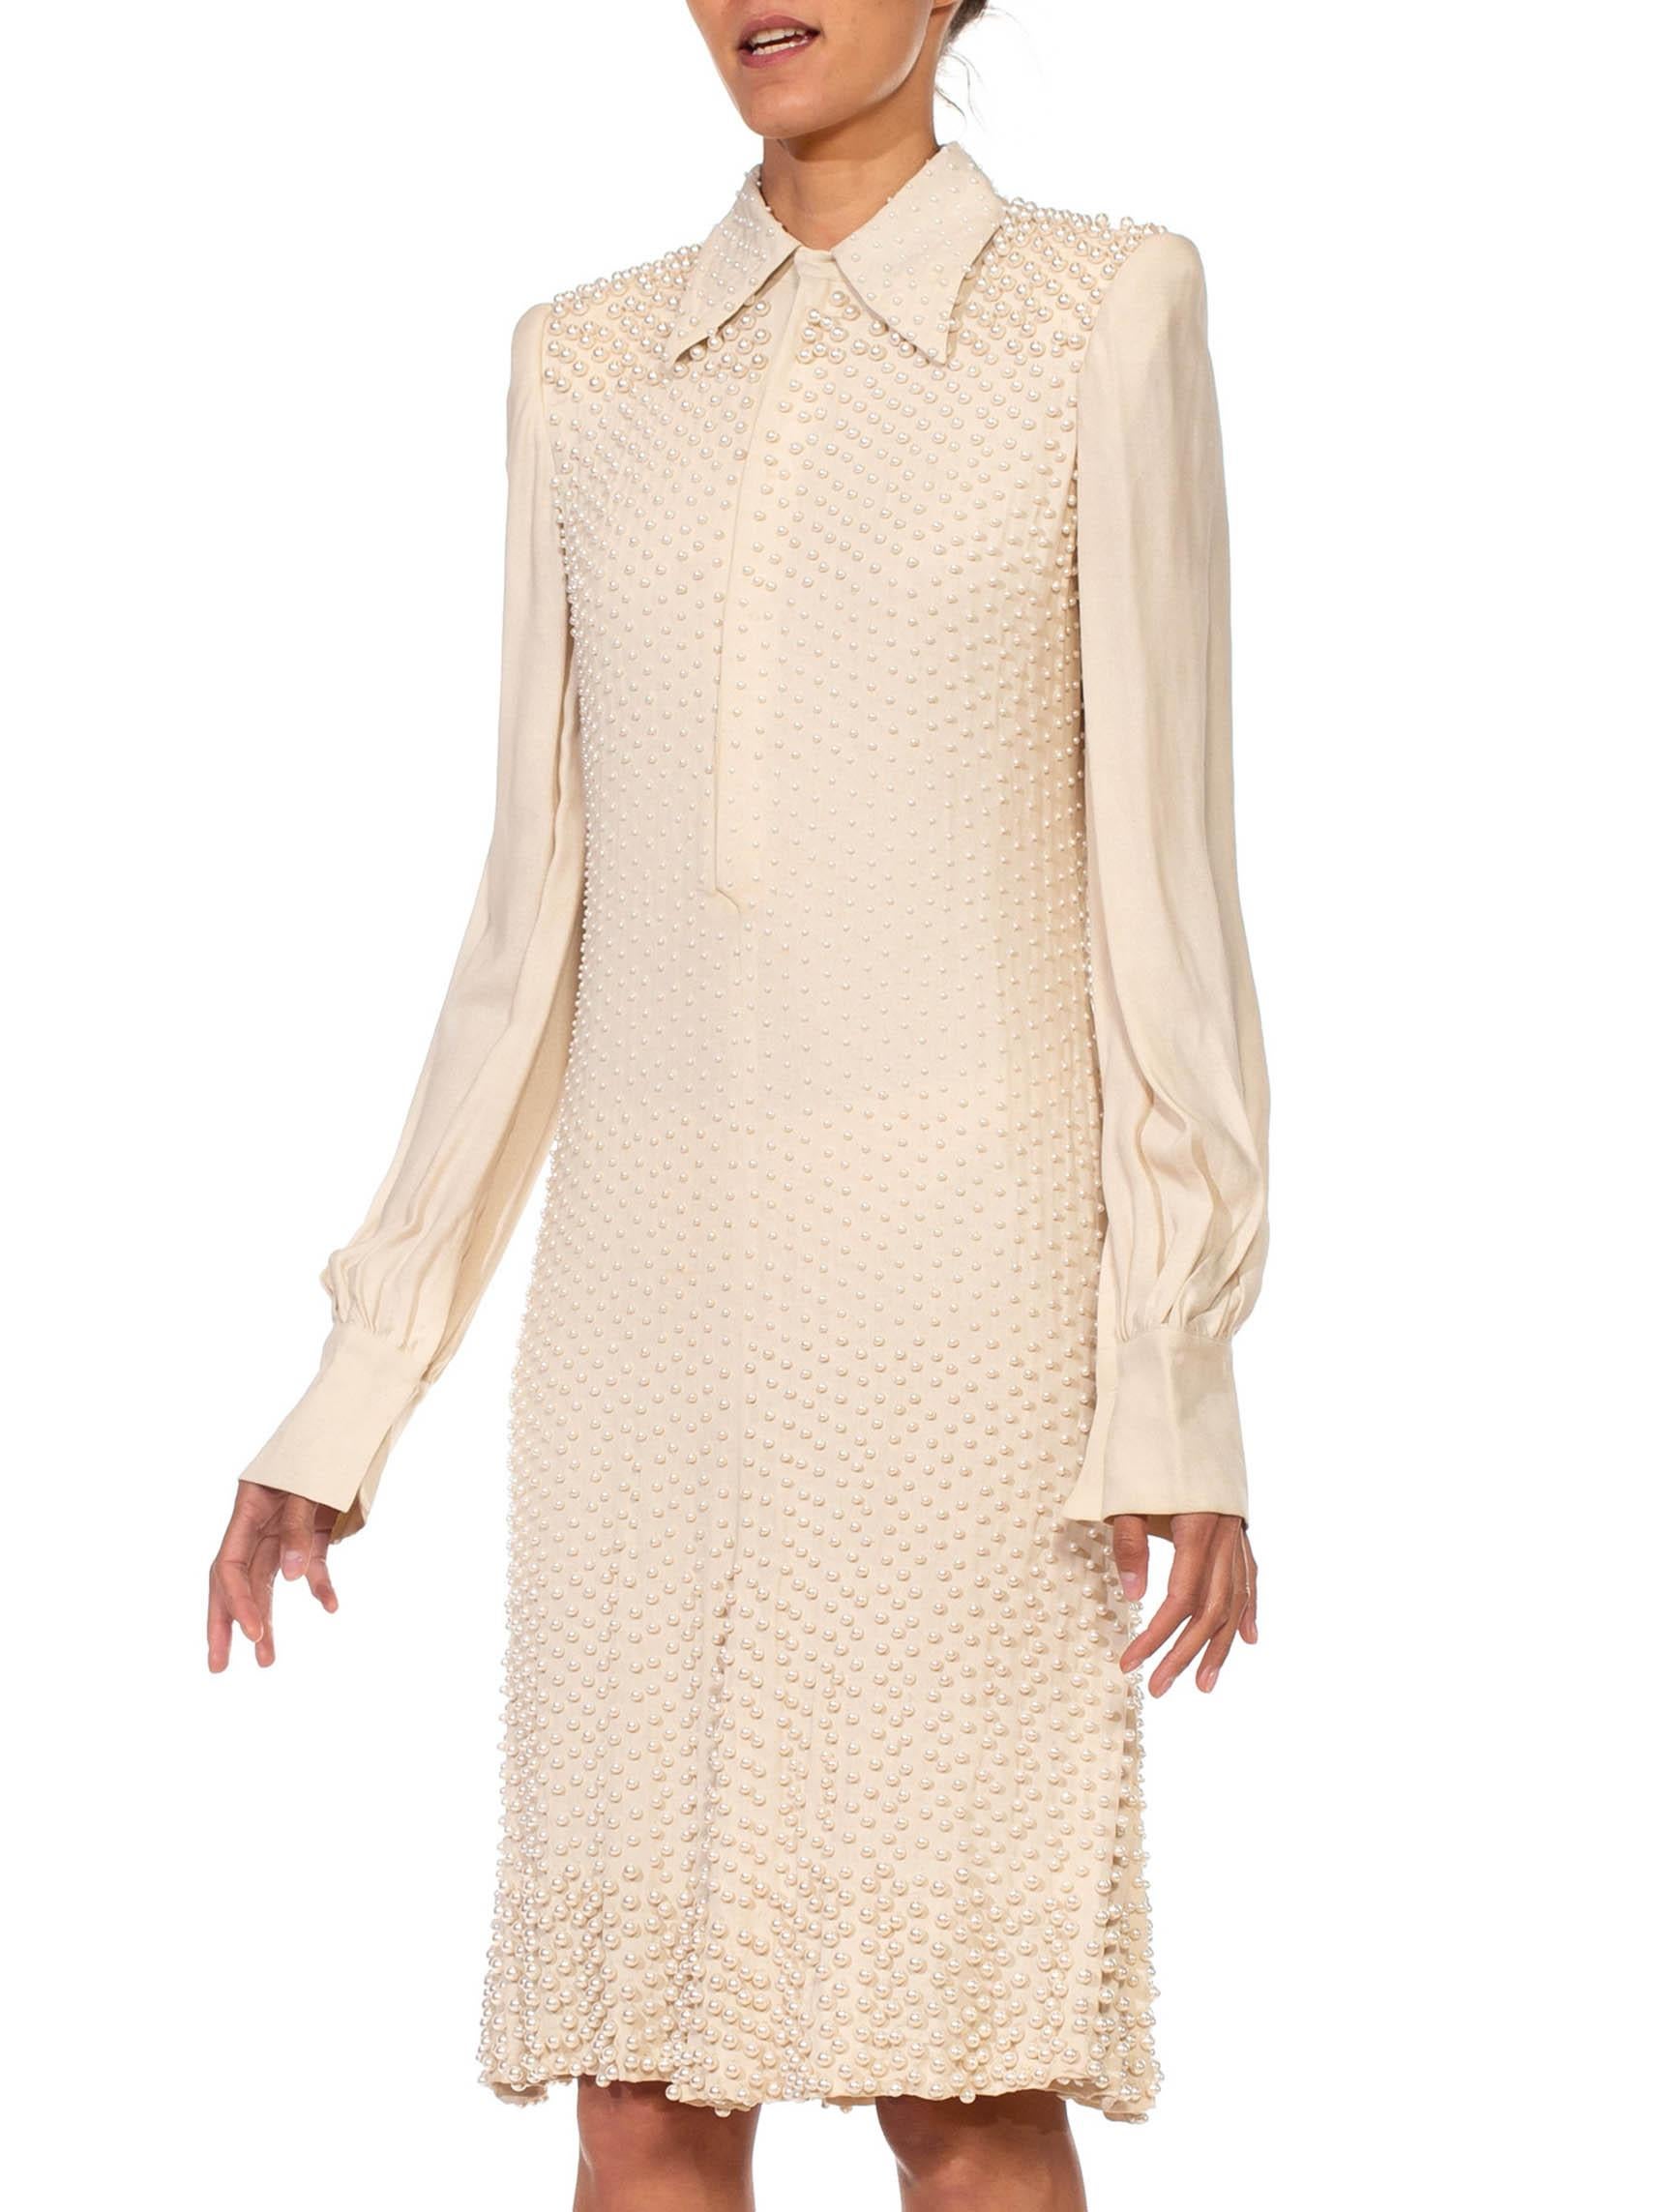 Women's 2000S JEAN PAUL GAULTIER Cream Silk Long Sleeved Cocktail Dress Covered In Pear For Sale